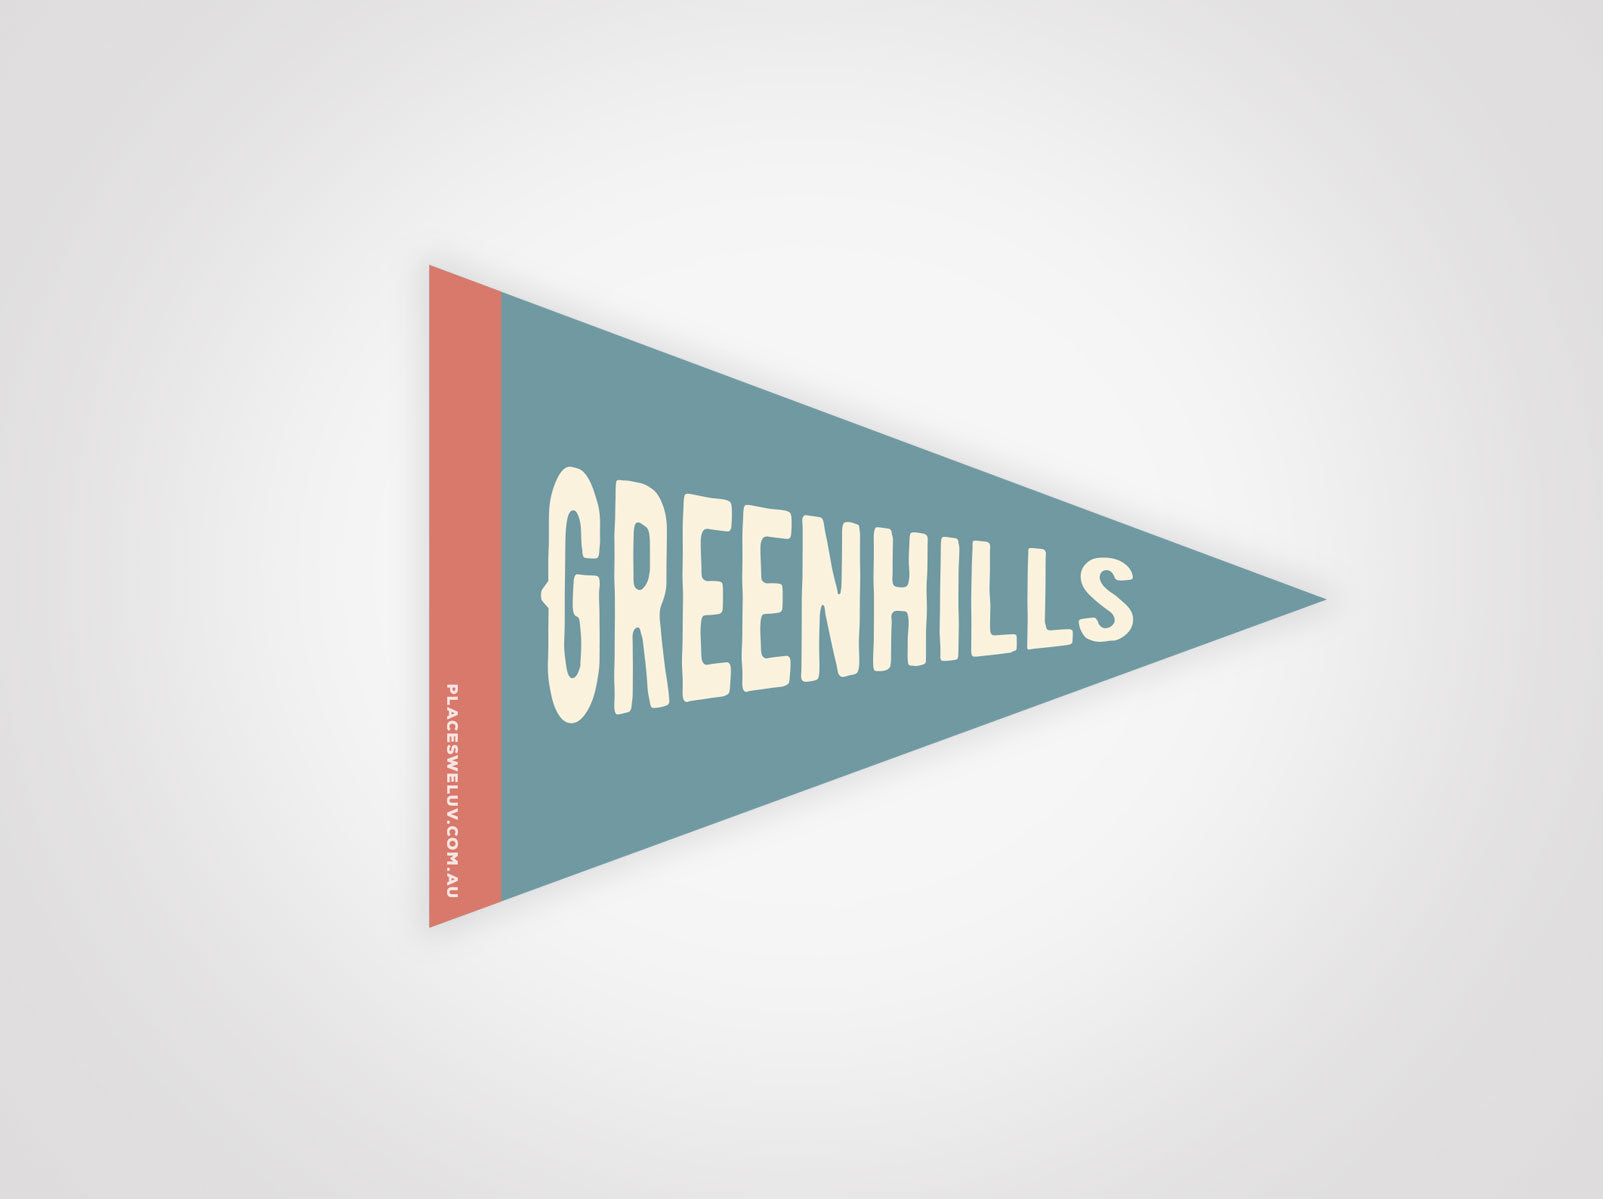 Greenhills vintage travel flag decal by places we luv